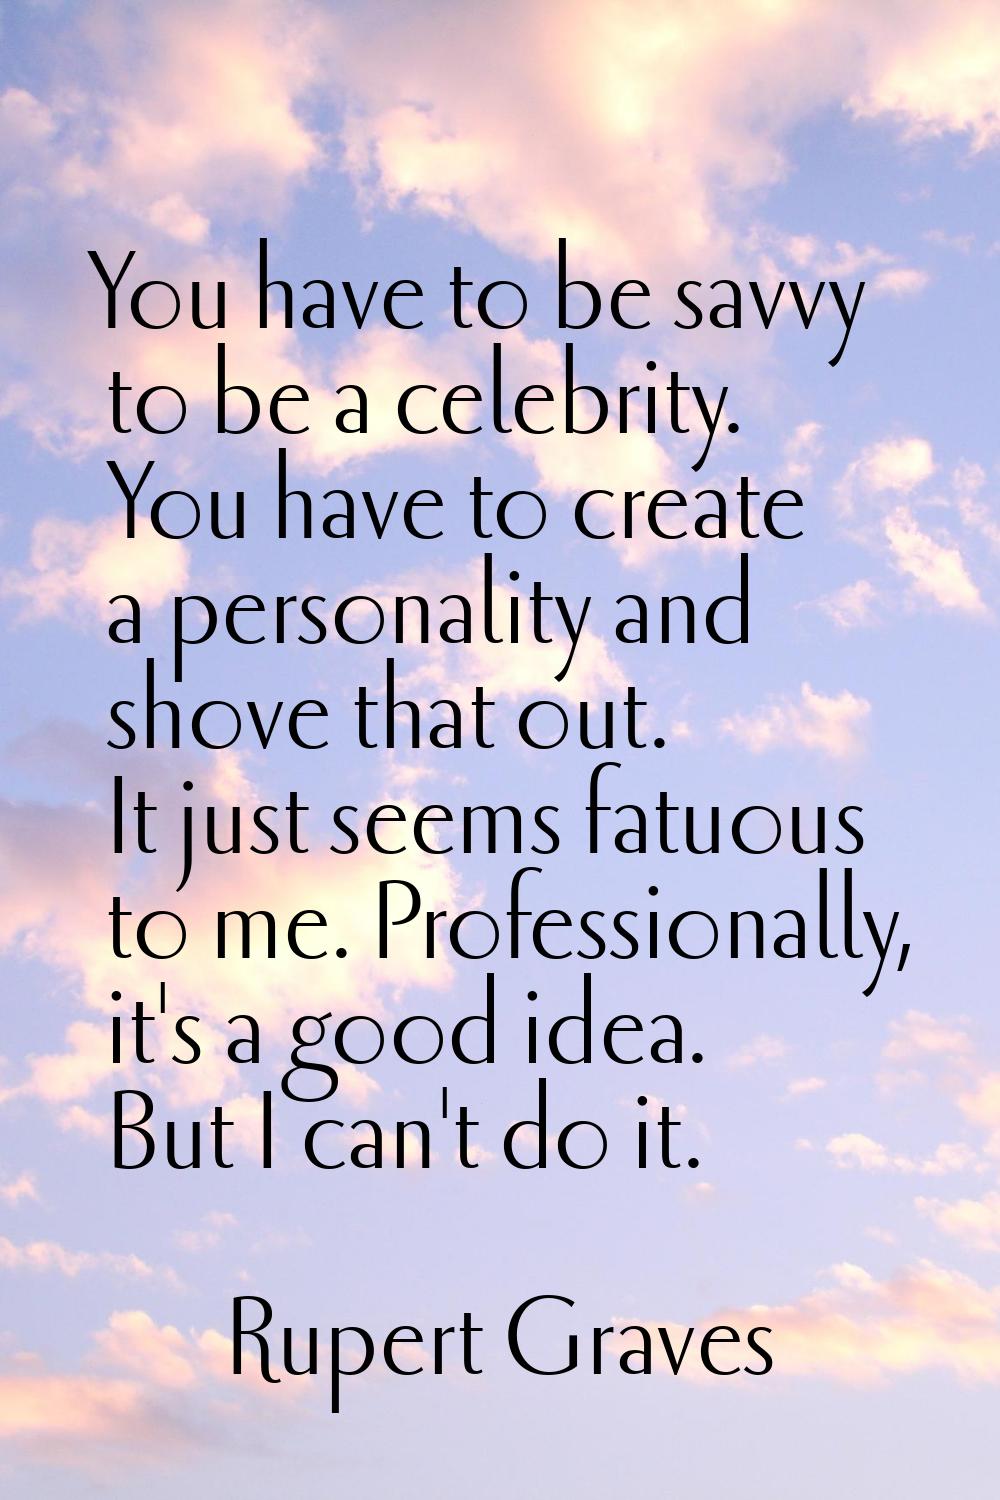 You have to be savvy to be a celebrity. You have to create a personality and shove that out. It jus